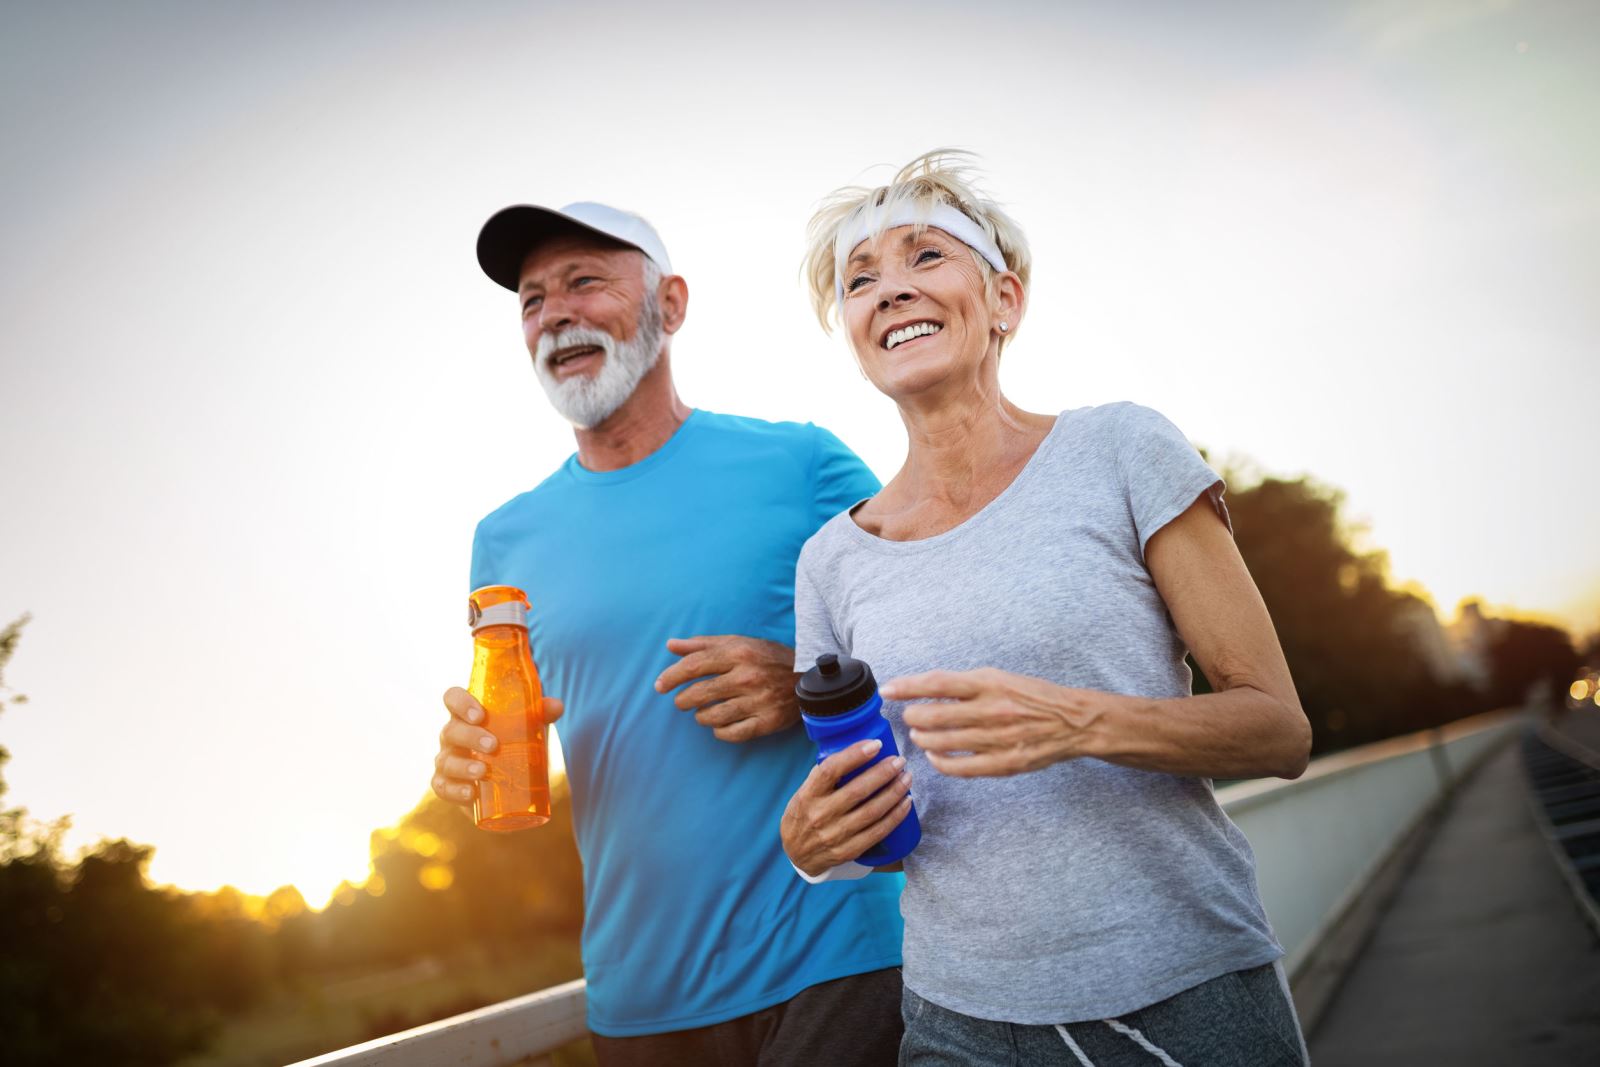 TWK10® muscle probiotics: A new stage of opportunity in healthy aging